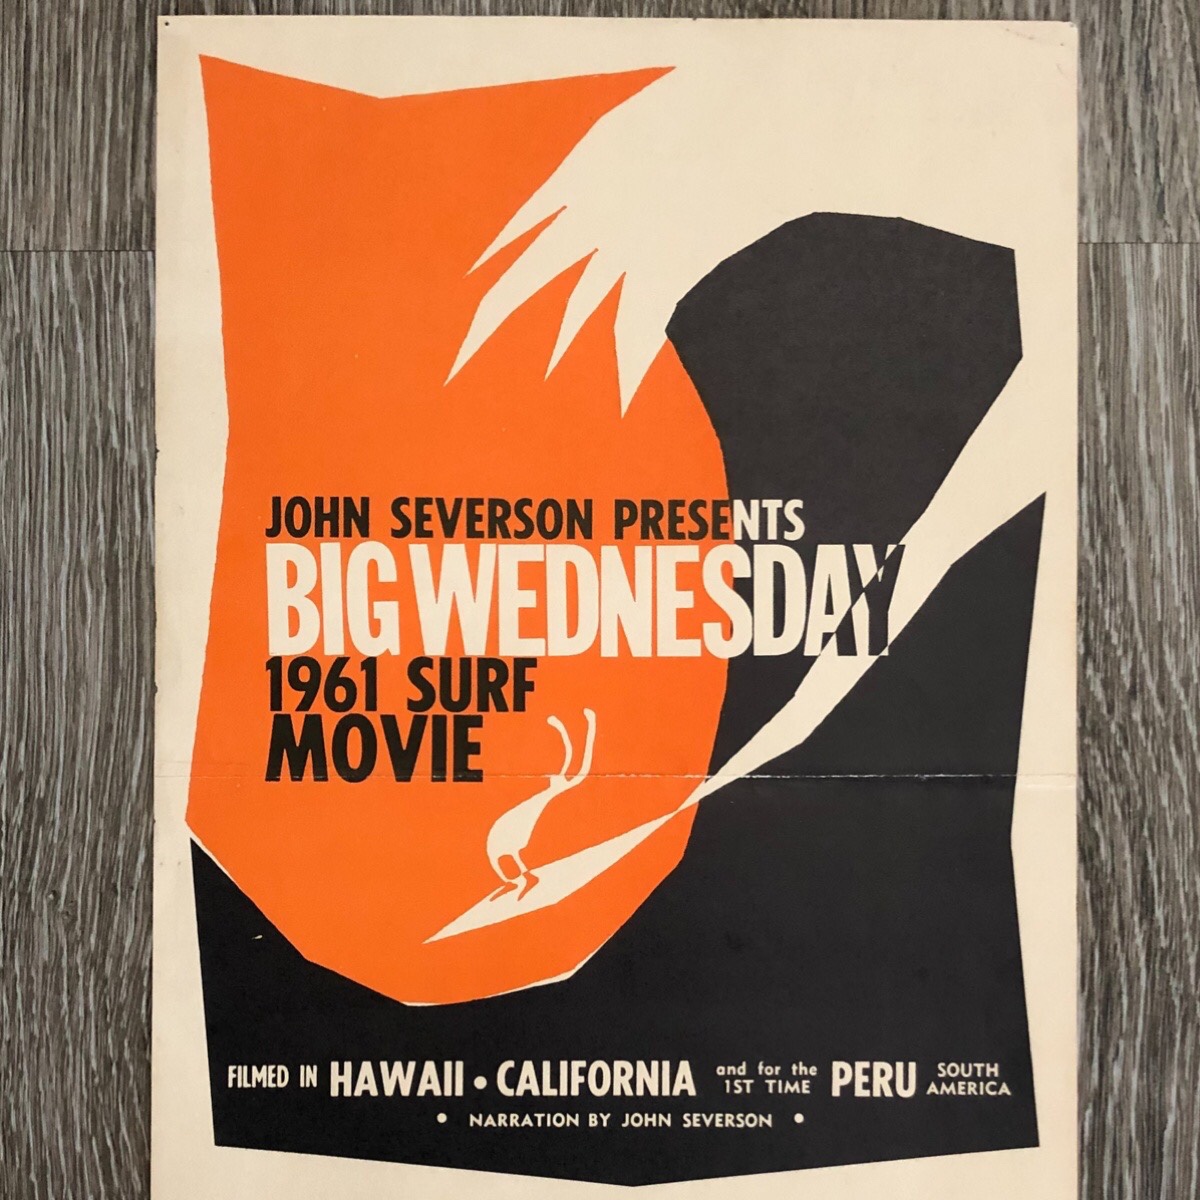 The First Big Wednesday – 1961